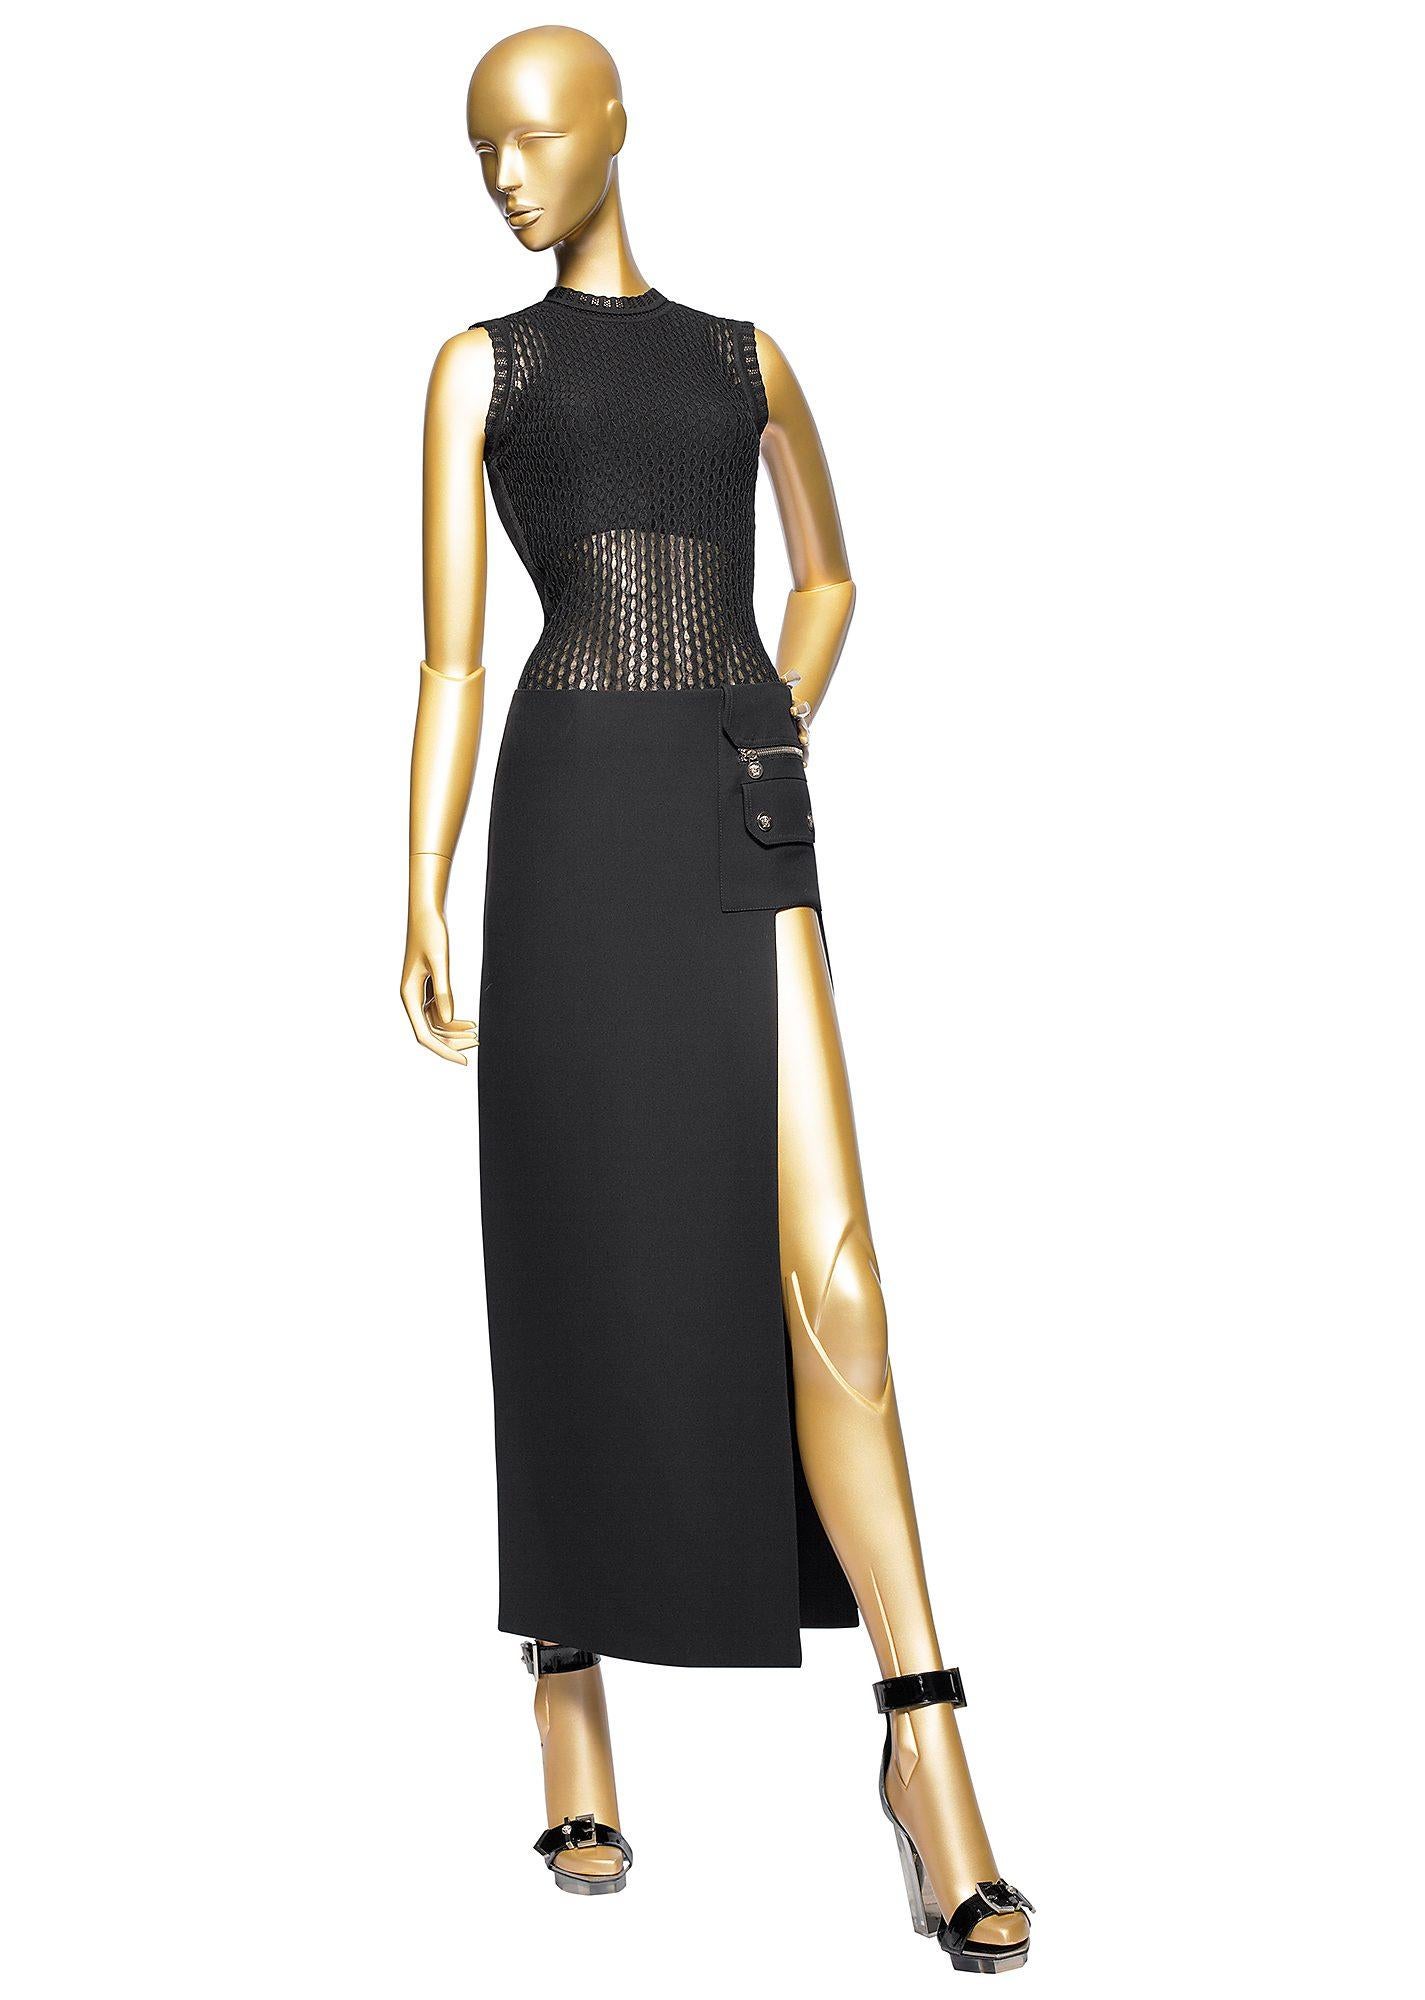 VERSACE    

Cut-Out Maxi Skirt 

Maxi length skirt with external pocket feature and cut out thigh detailing.

100% silk

Fully lined in 100% silk

IT Size: 40 - US 6

Made in Italy. 

Brand new, with tags.

Low waist 15